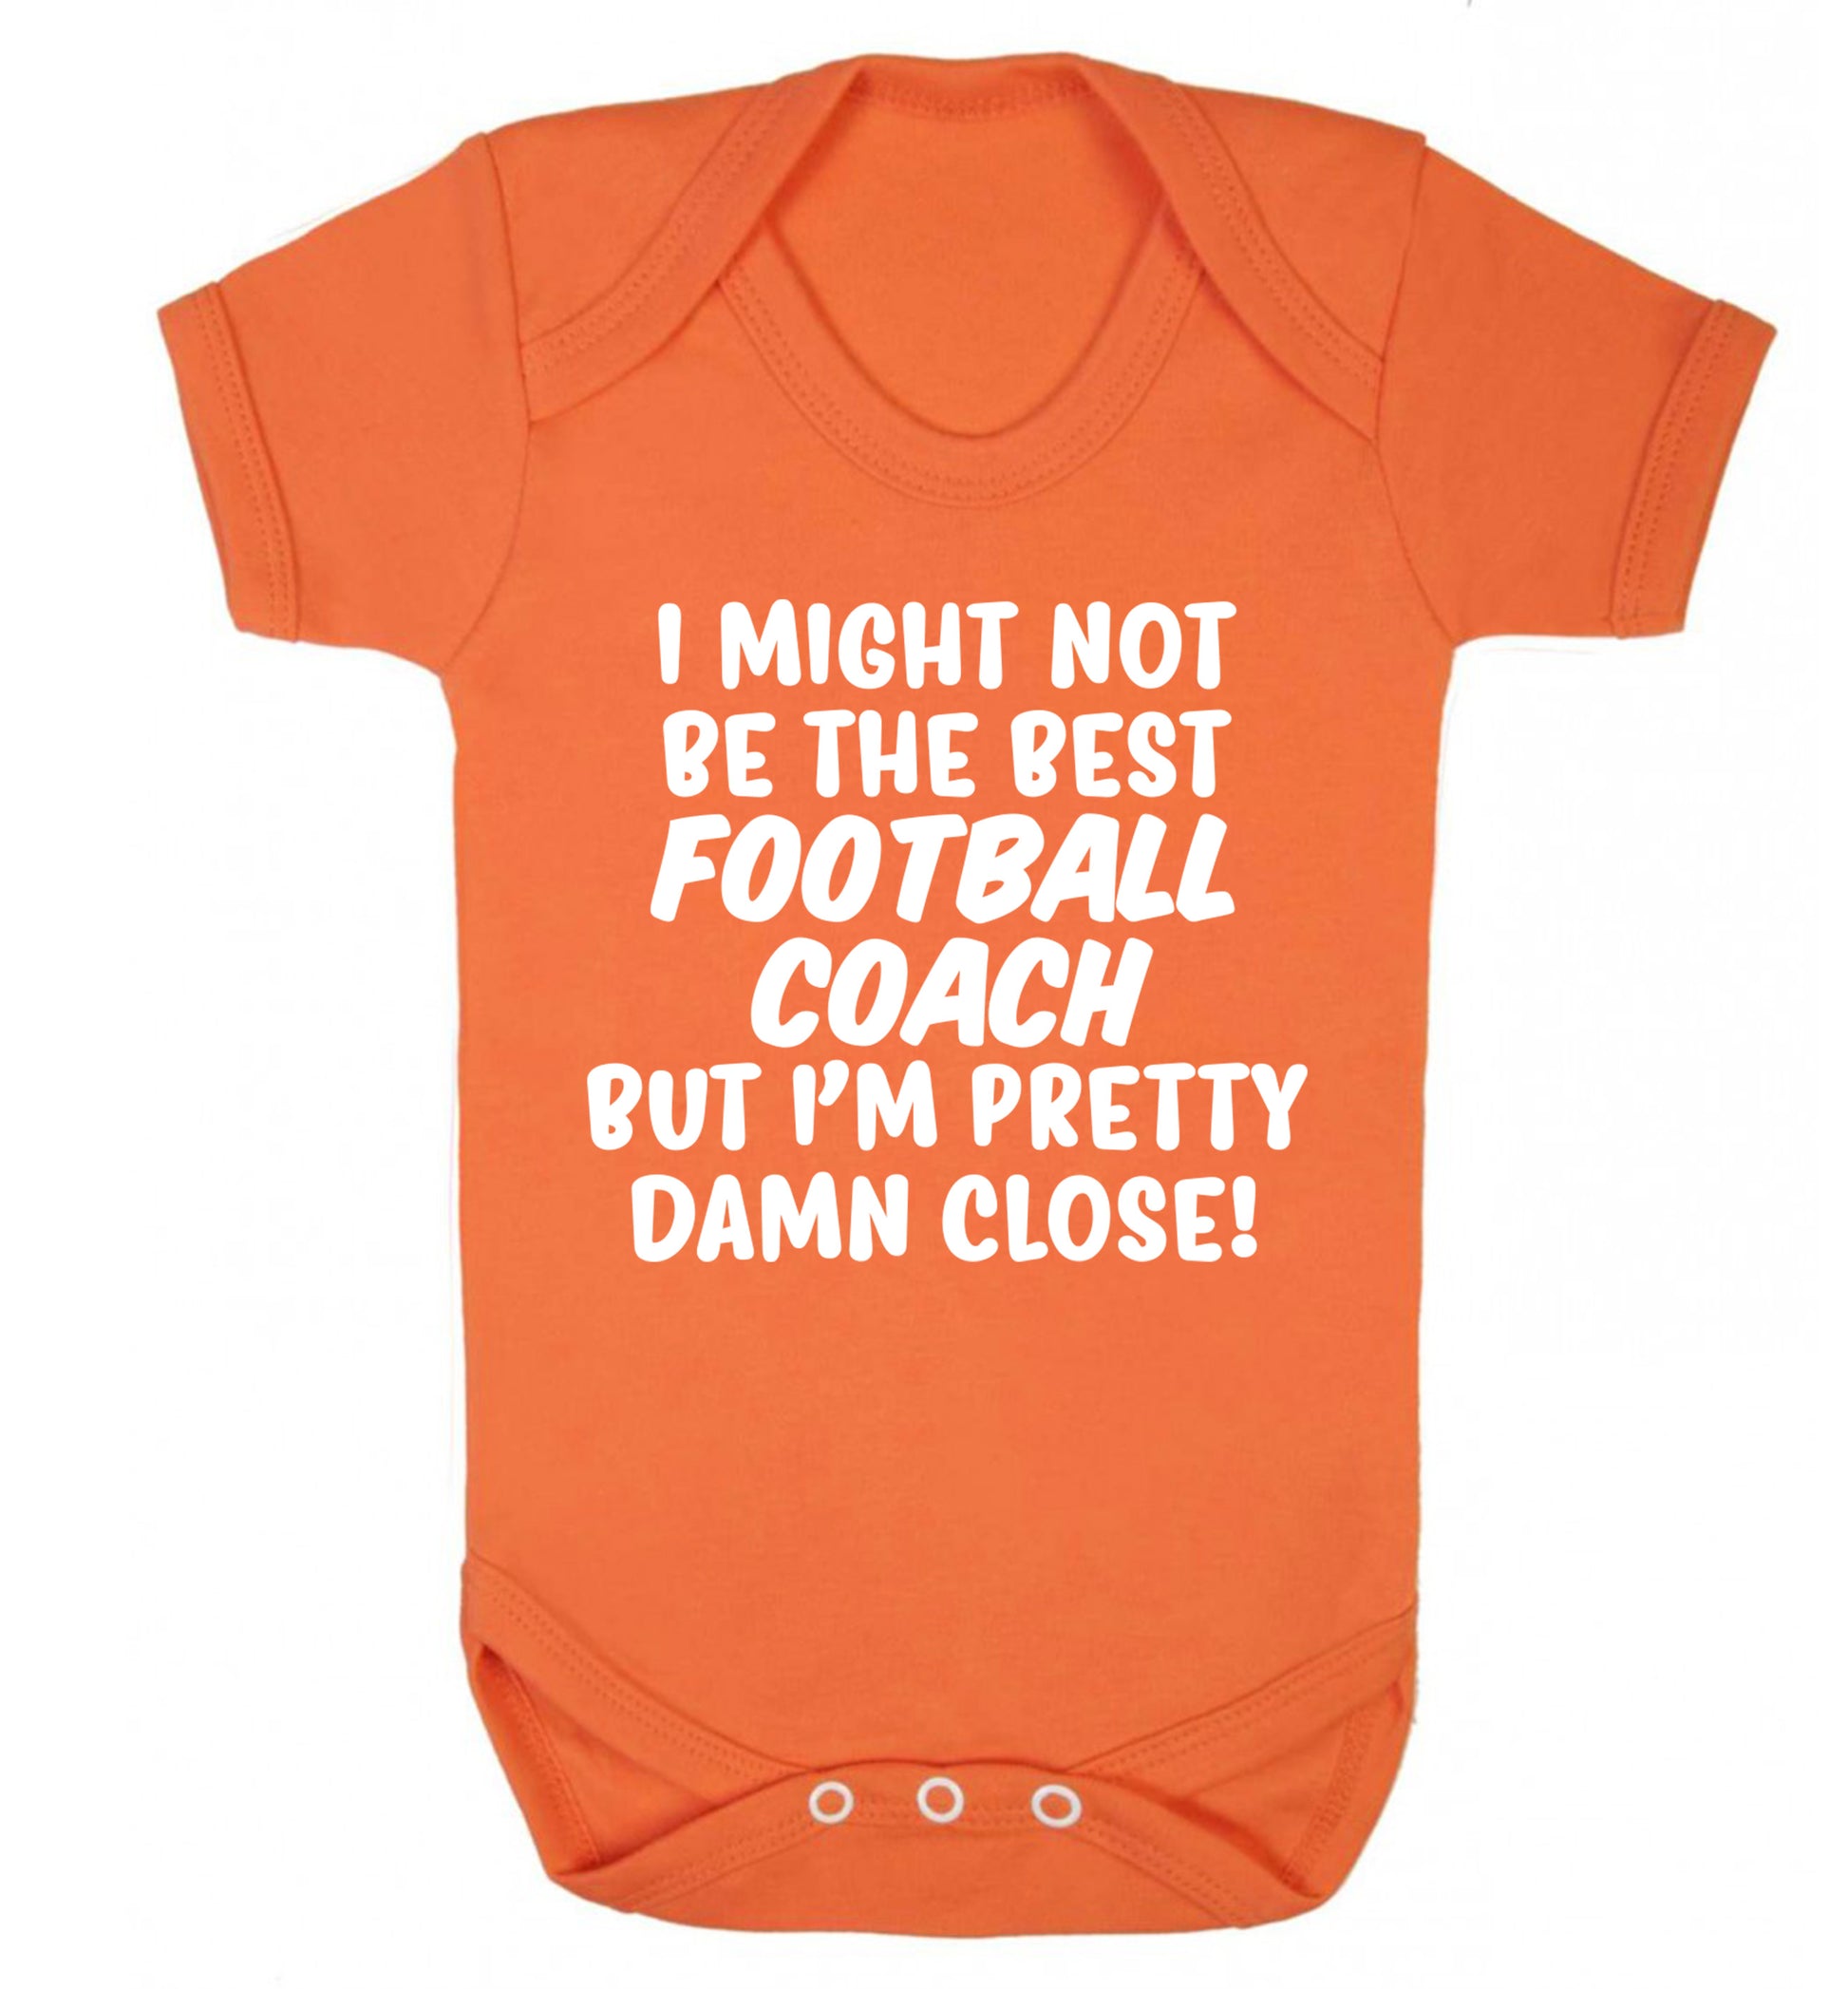 I might not be the best football coach but I'm pretty close! Baby Vest orange 18-24 months